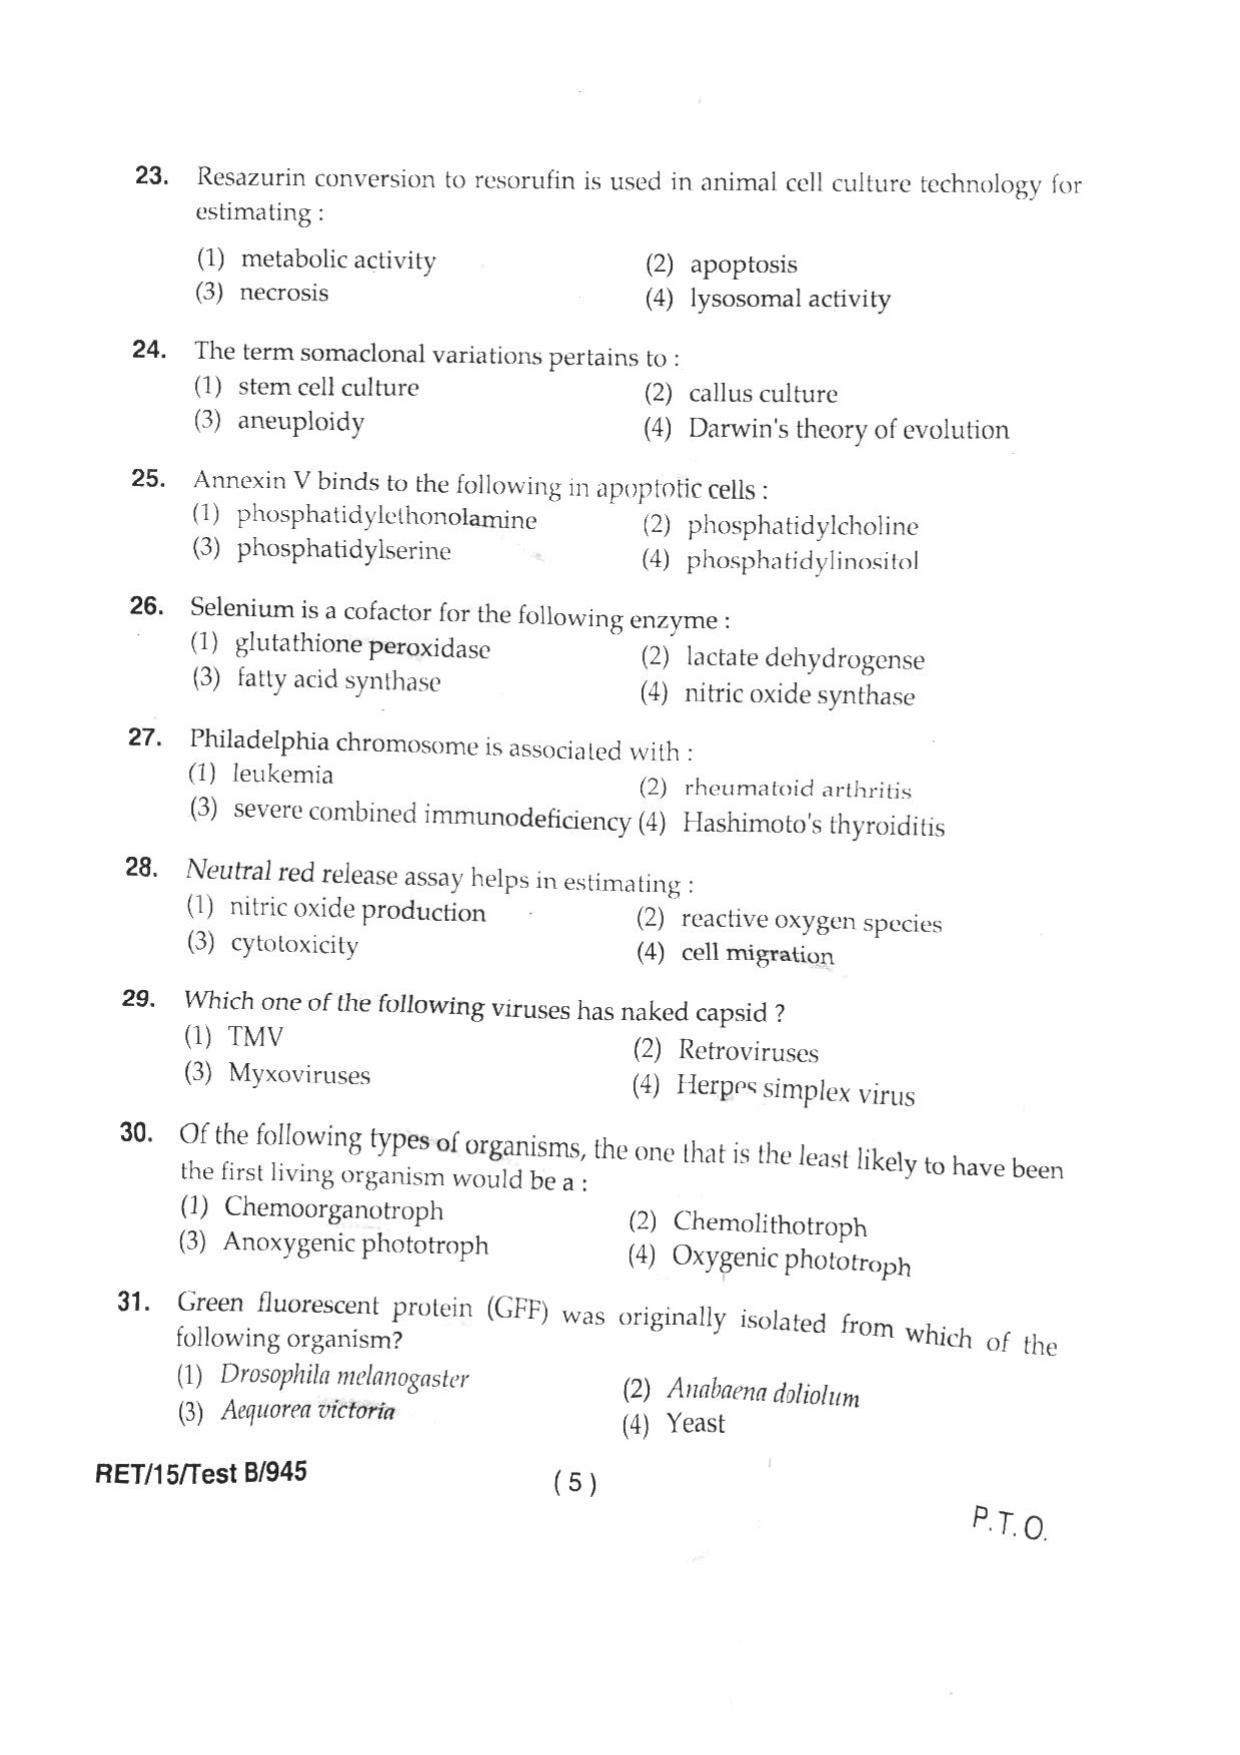 BHU RET BIOTECHNOLOGY 2015 Question Paper - Page 7